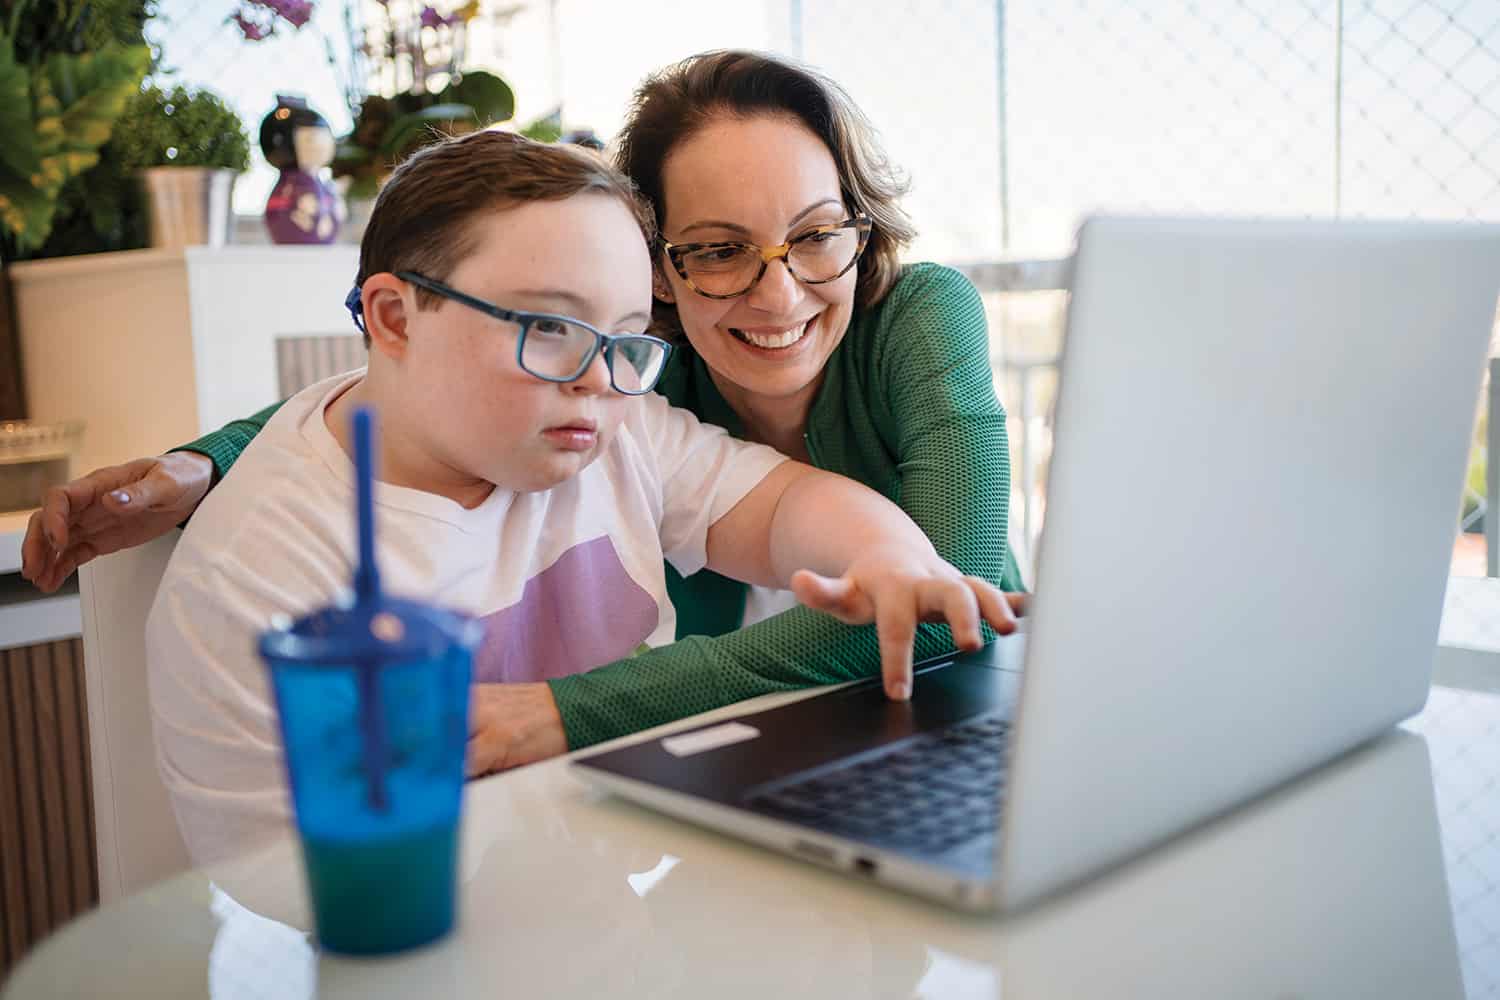 older woman helping boy with learning disabilities on a laptop